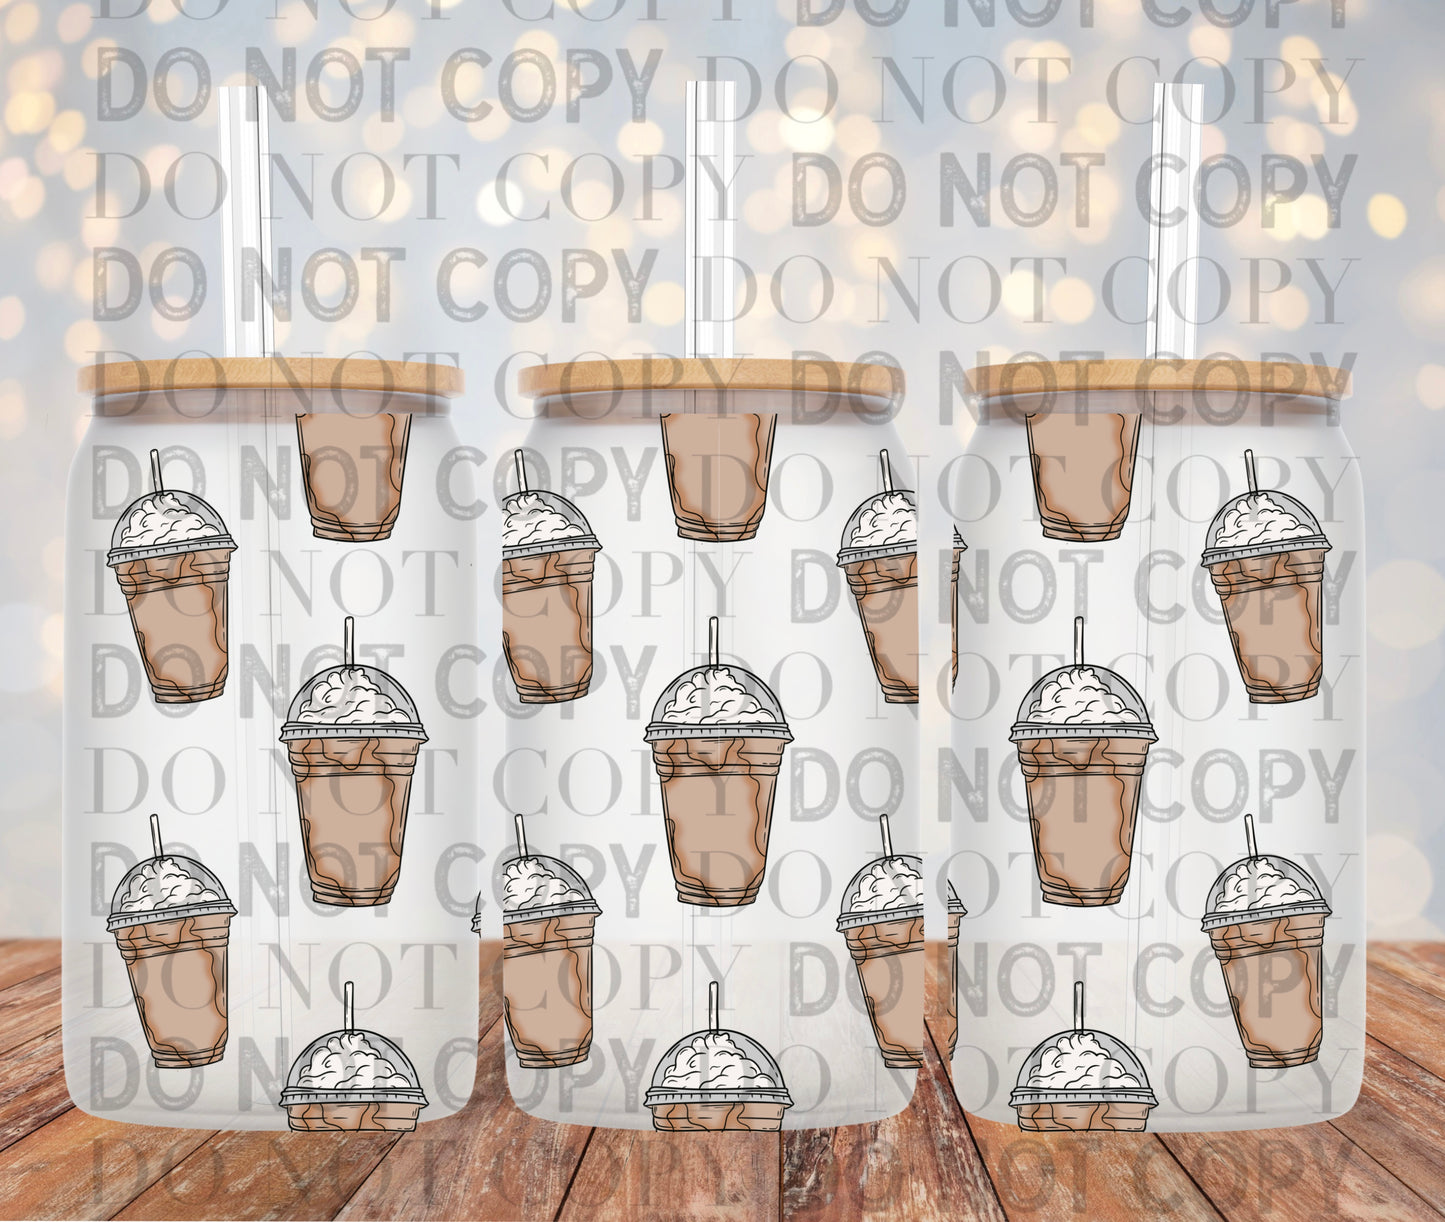 Coffee tumbler wrap sized for 16 oz frosted cup from mother tumbler  Cerra's Shop Creates   